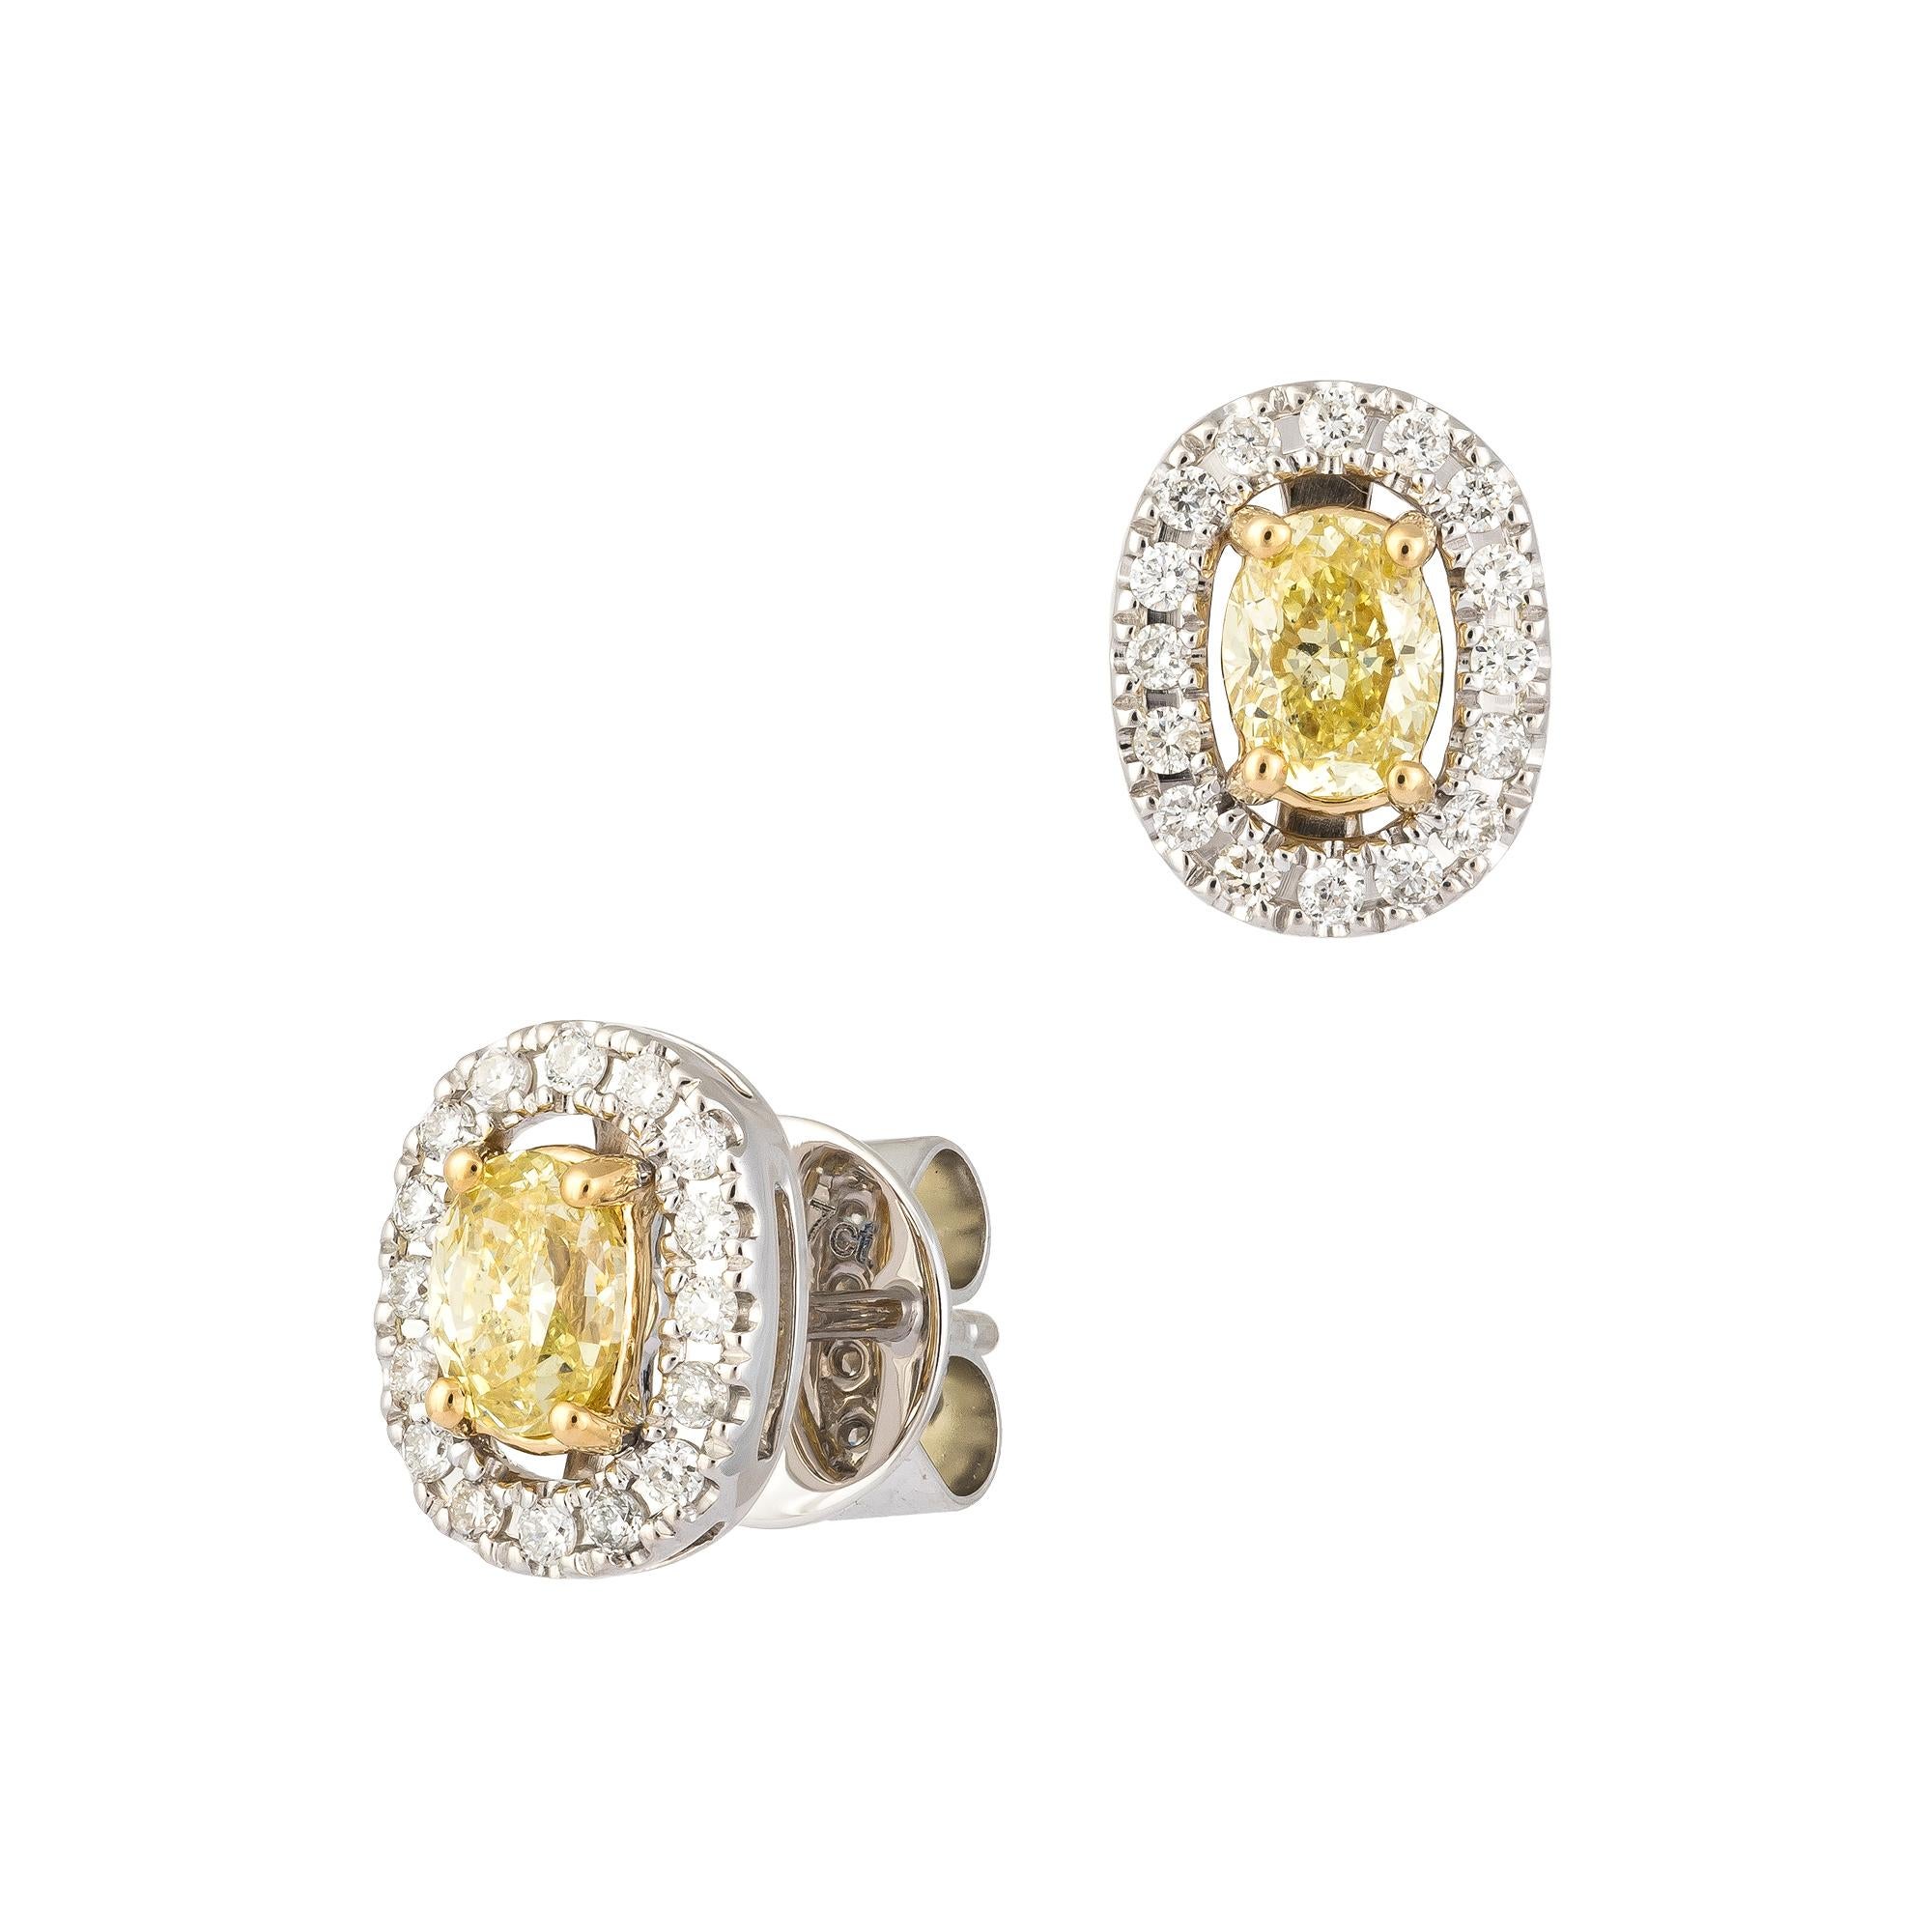 EARRING 18K White Yellow Gold , D 0.18 Cts/32 Pieces , Yellow Diamond 0.69 Cts/2 Pieces